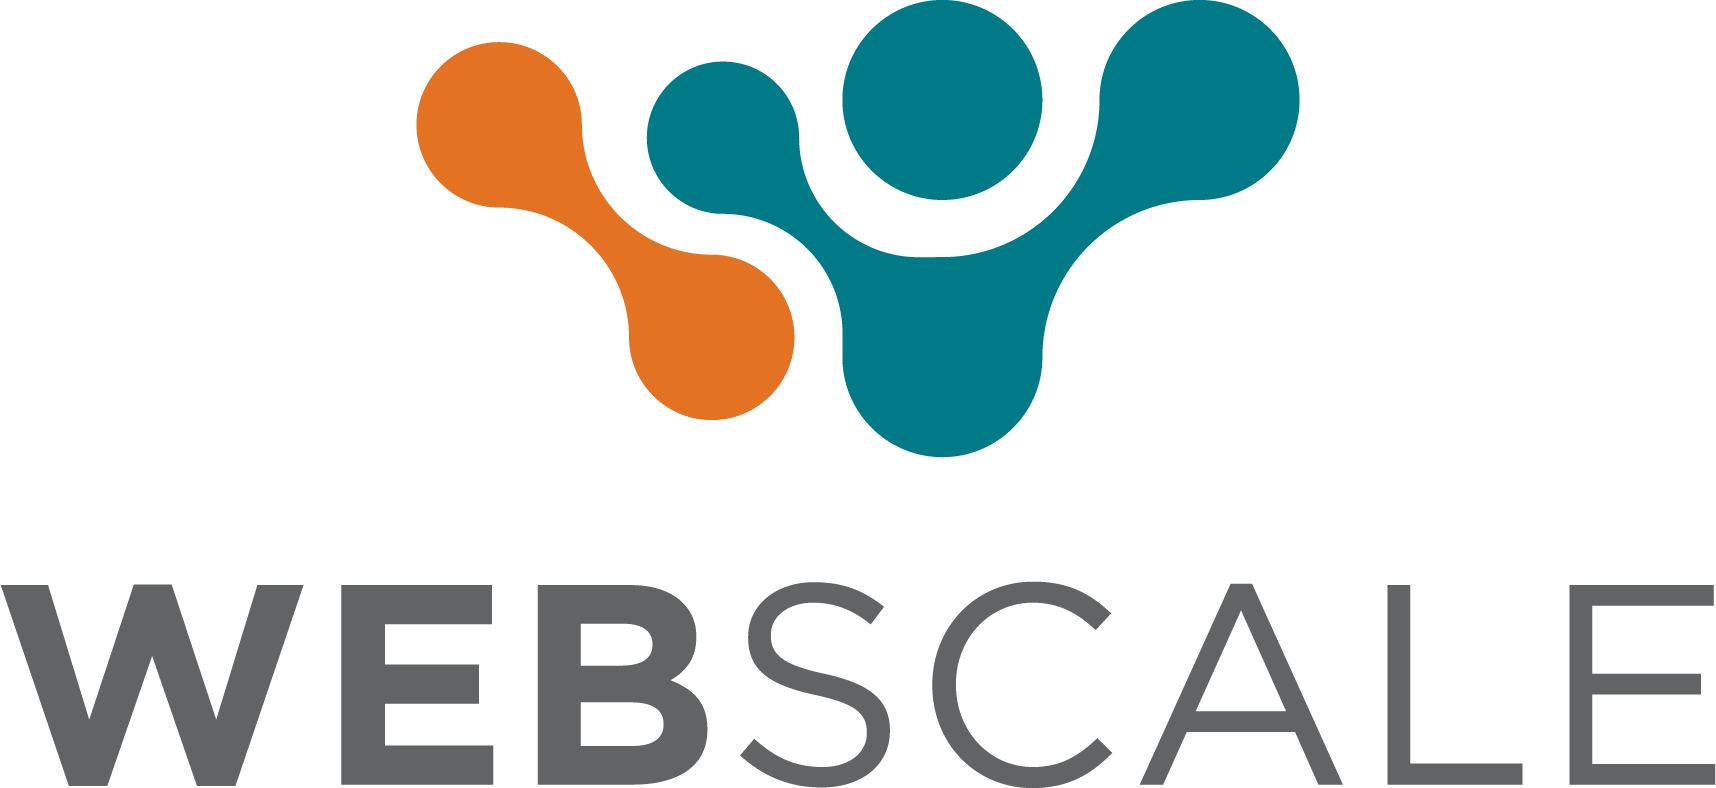 Webscale Networks